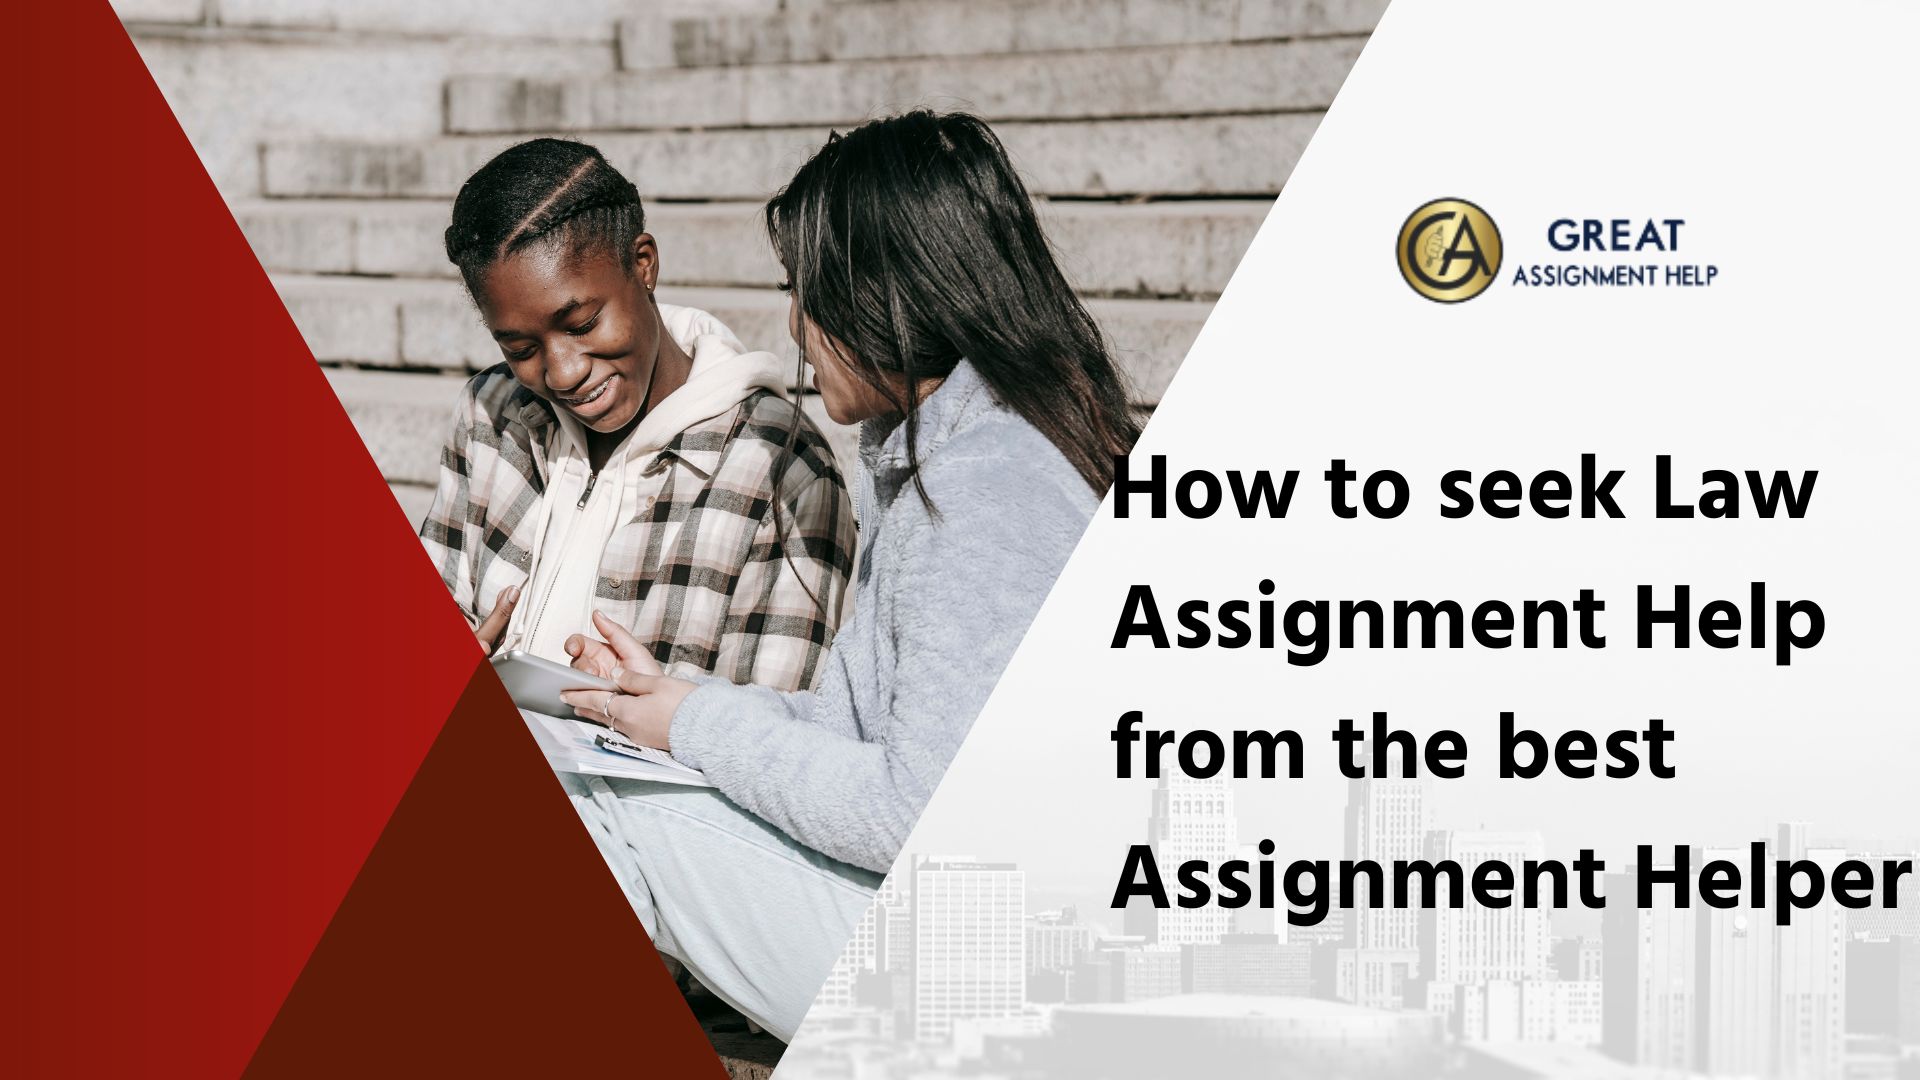 How to seek Law Assignment Help from Assignment Helper?